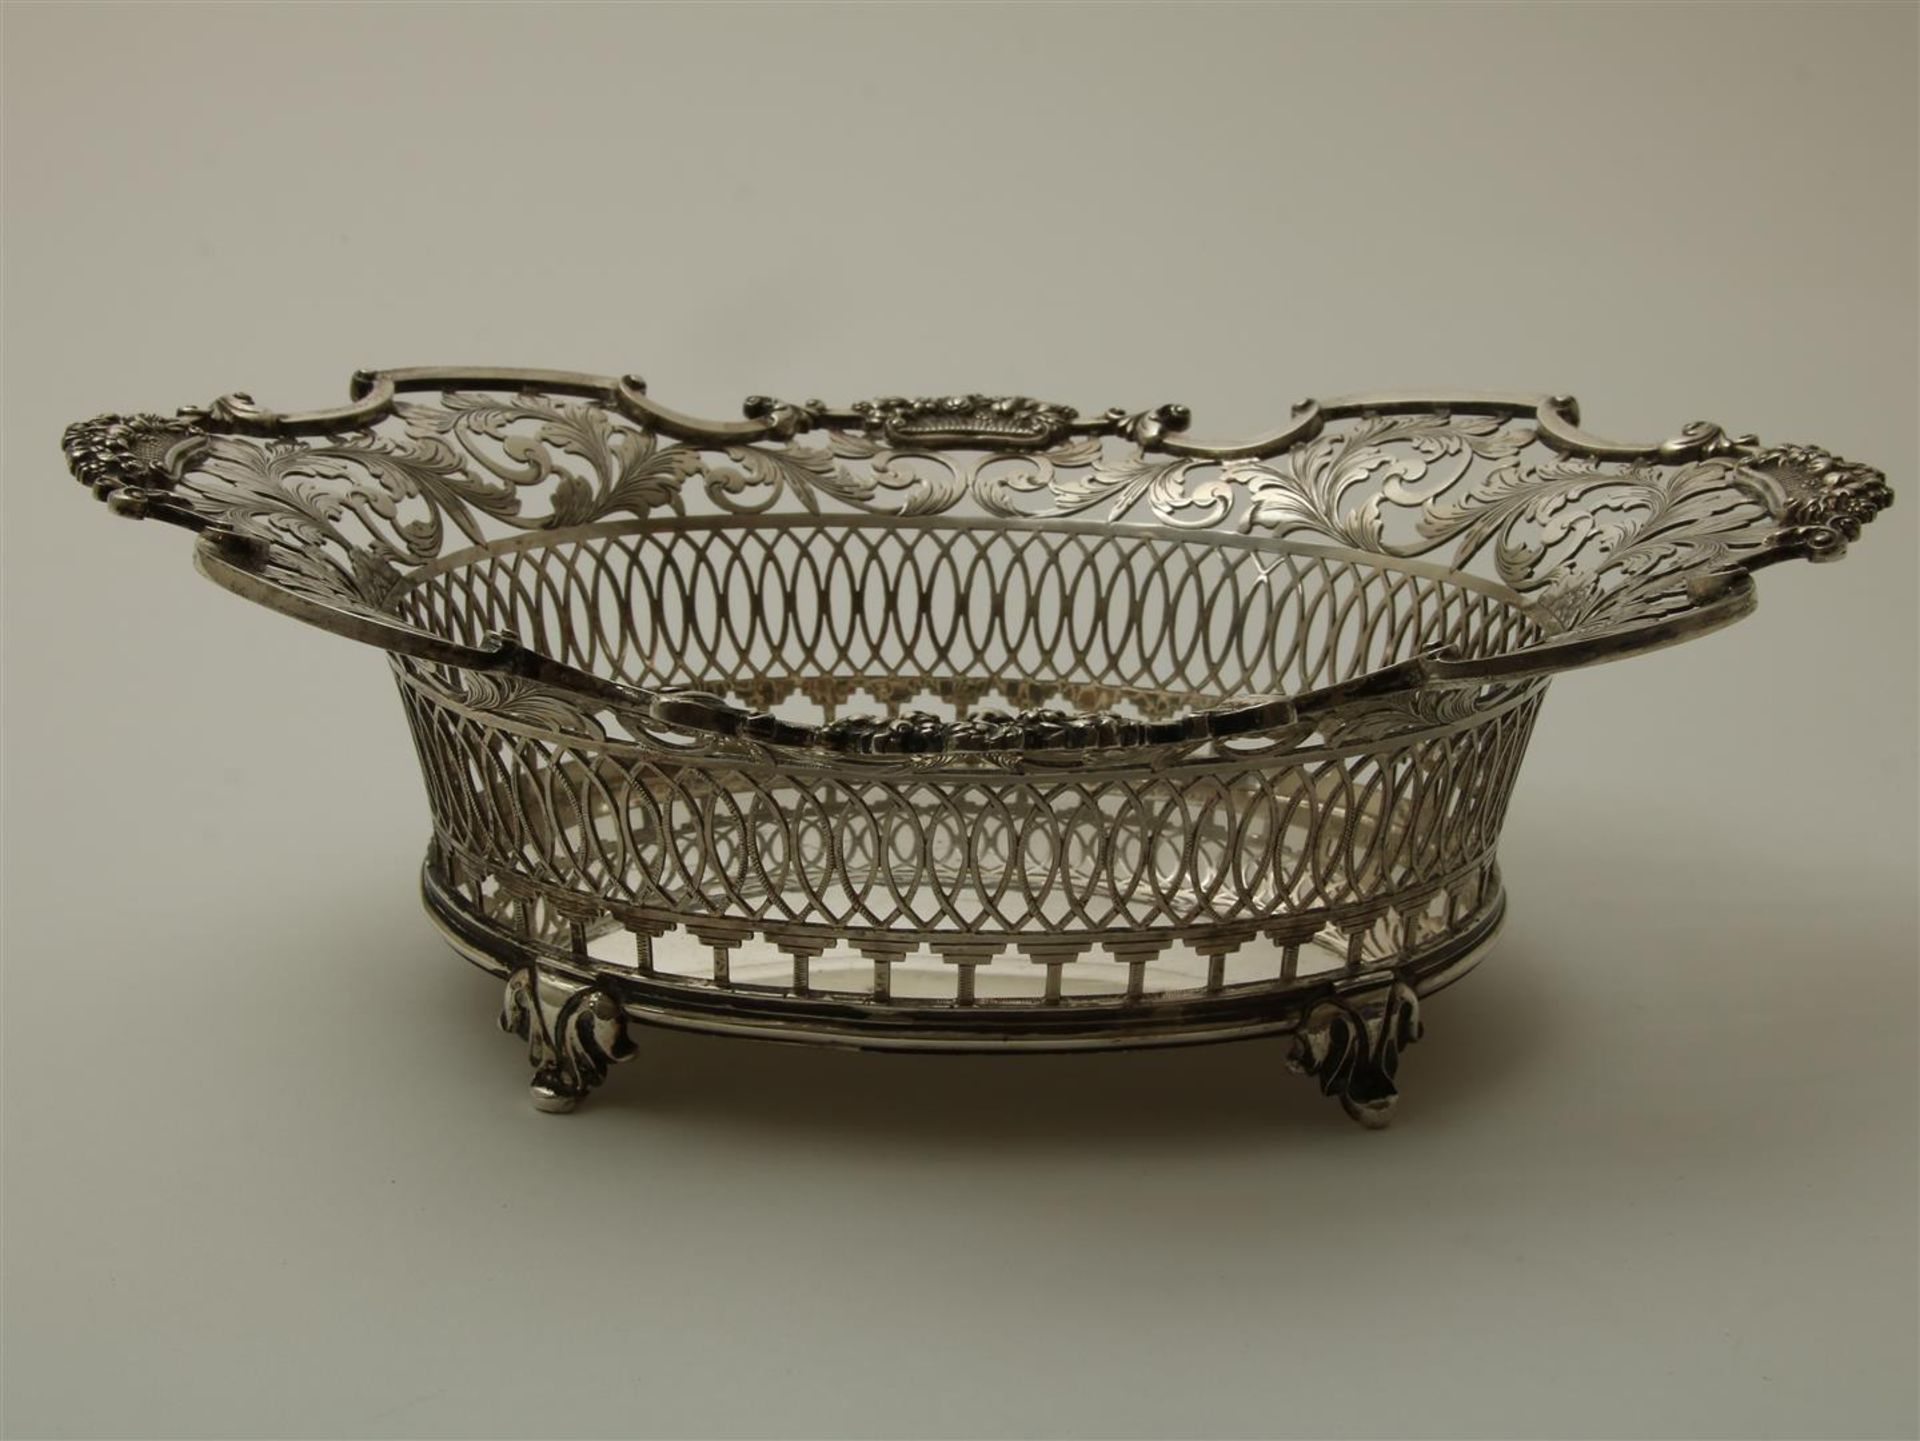 19th century silver engraved and openwork bread basket on legs - Image 2 of 4